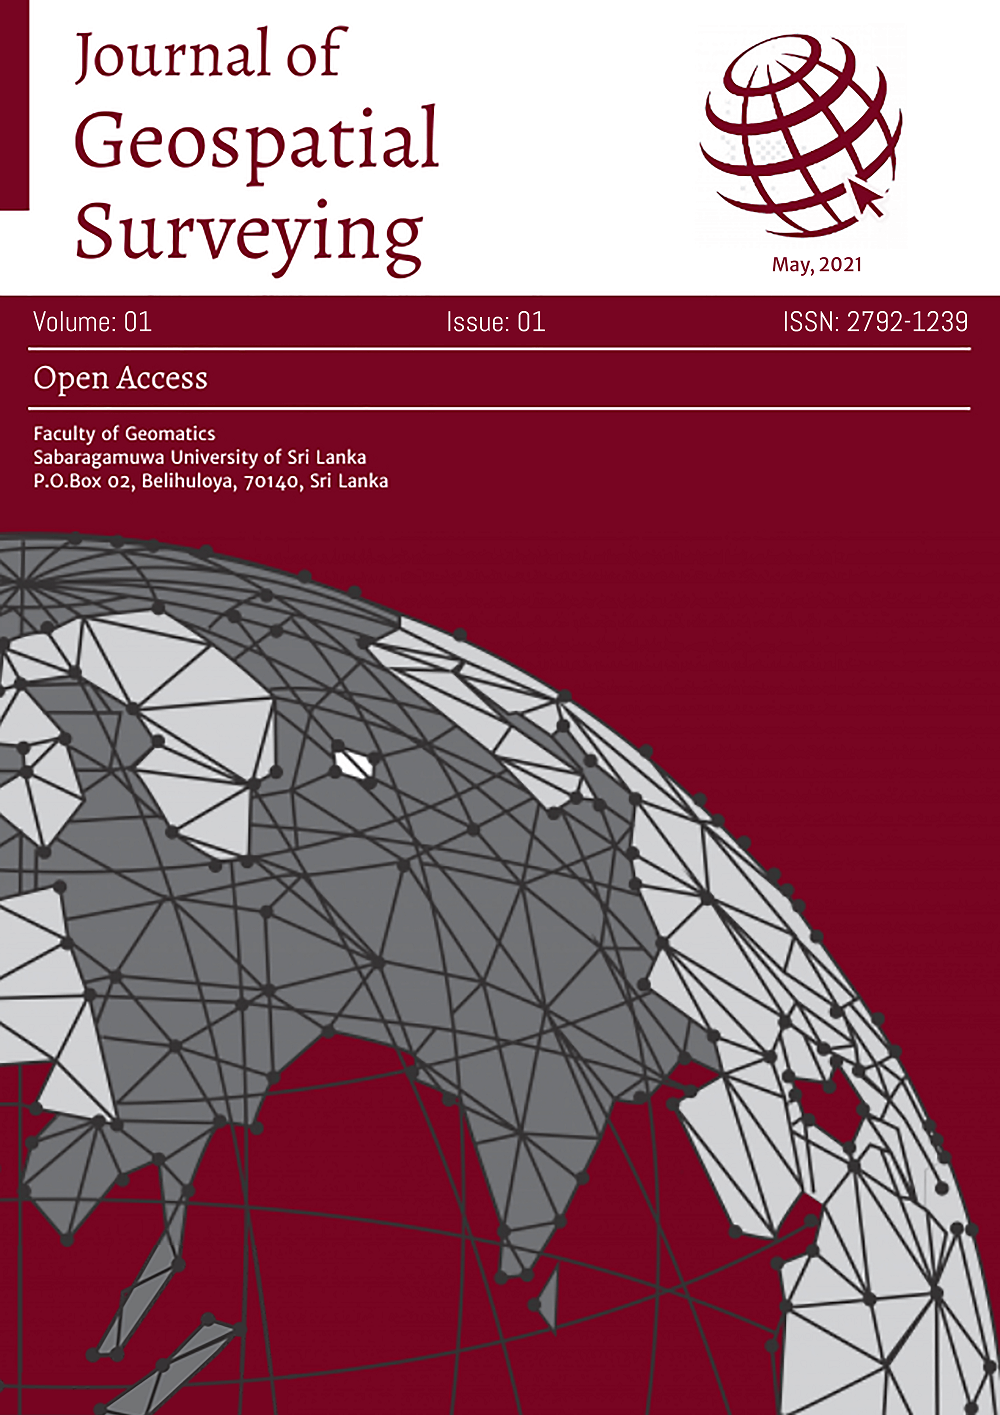 Journal of Geospatial Surveying